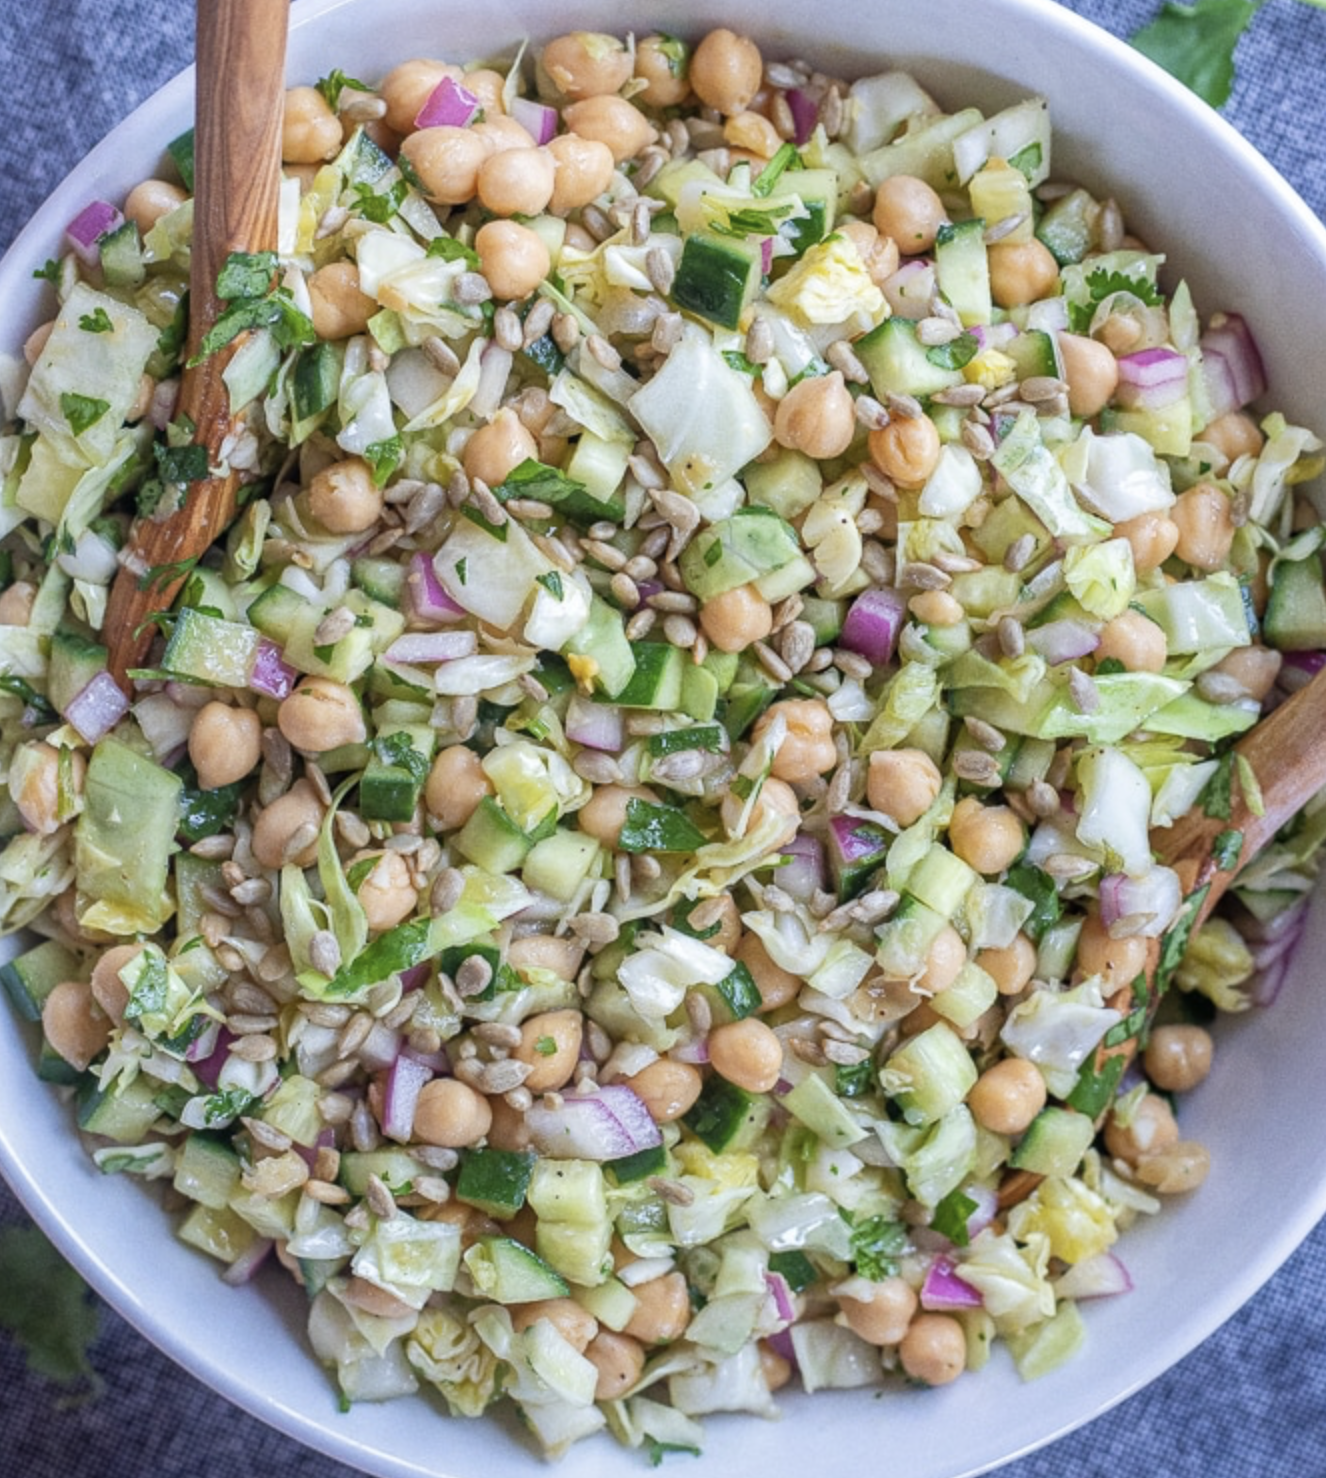 Featured image for “Chickpea salad with Cucumber and Cabbage”